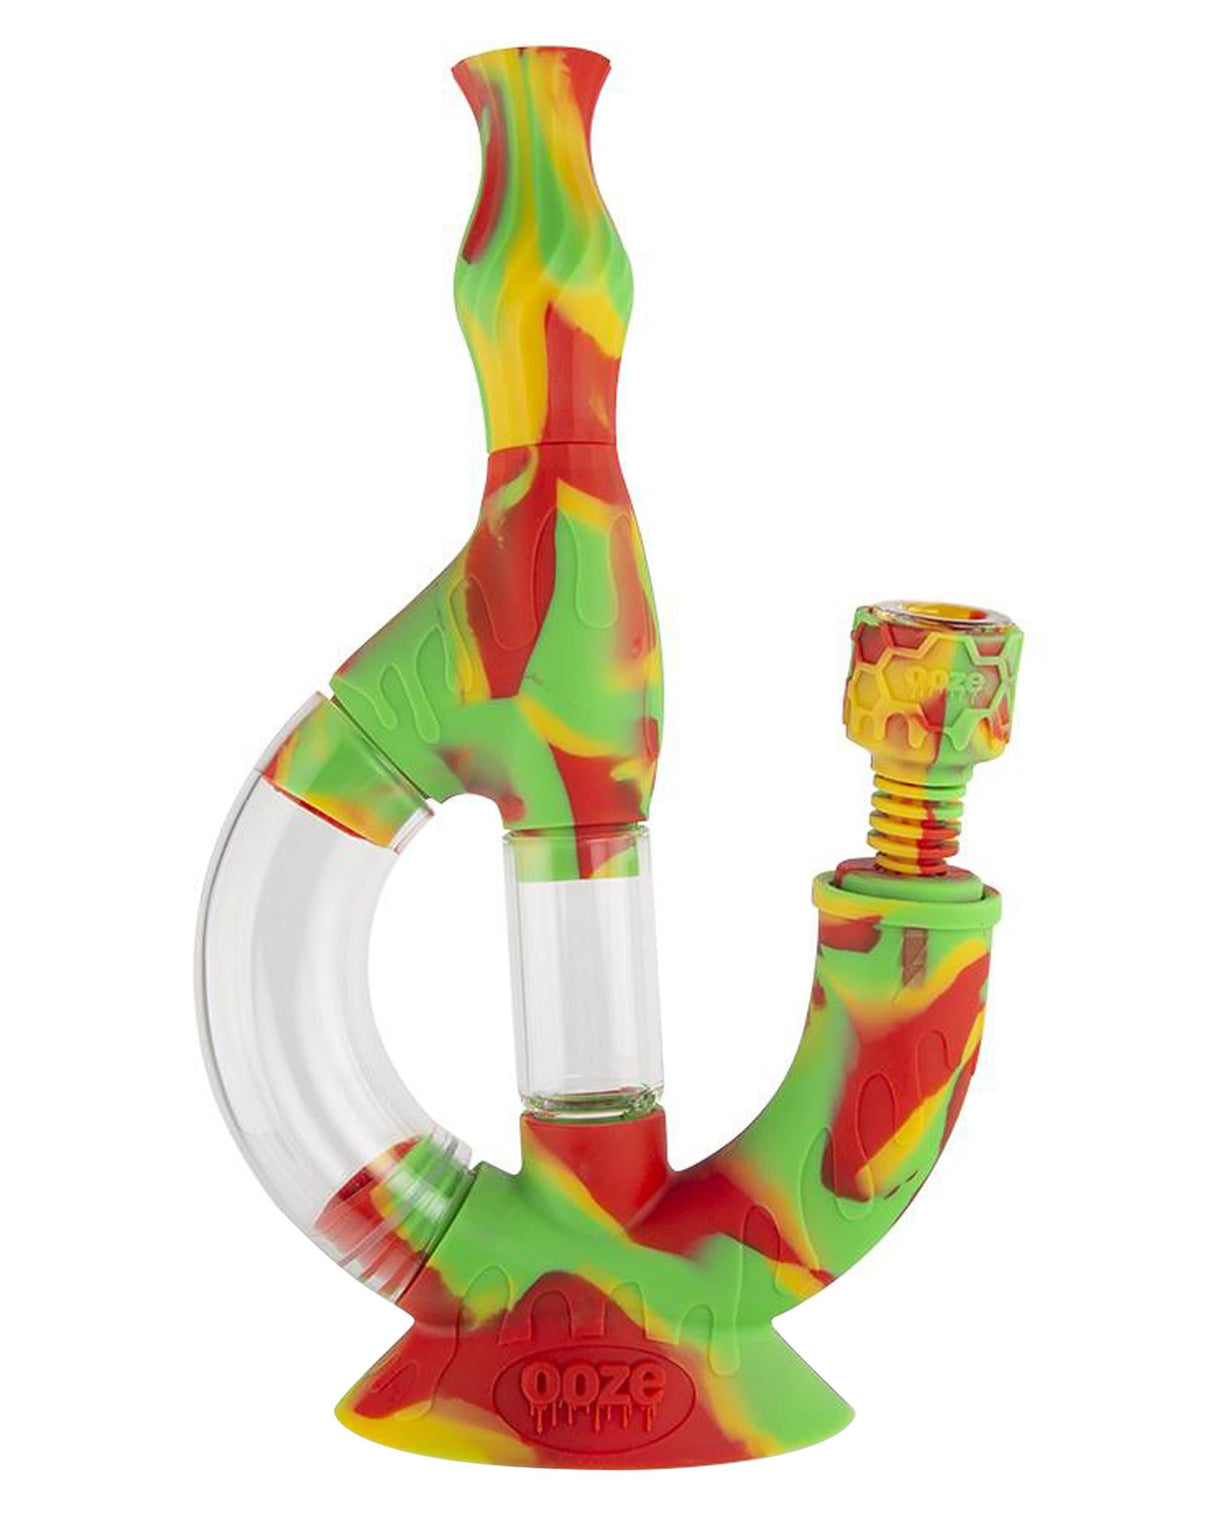 Ooze Echo Silicone Bong in vibrant red, yellow, and green colors, with clear glass chamber, side view